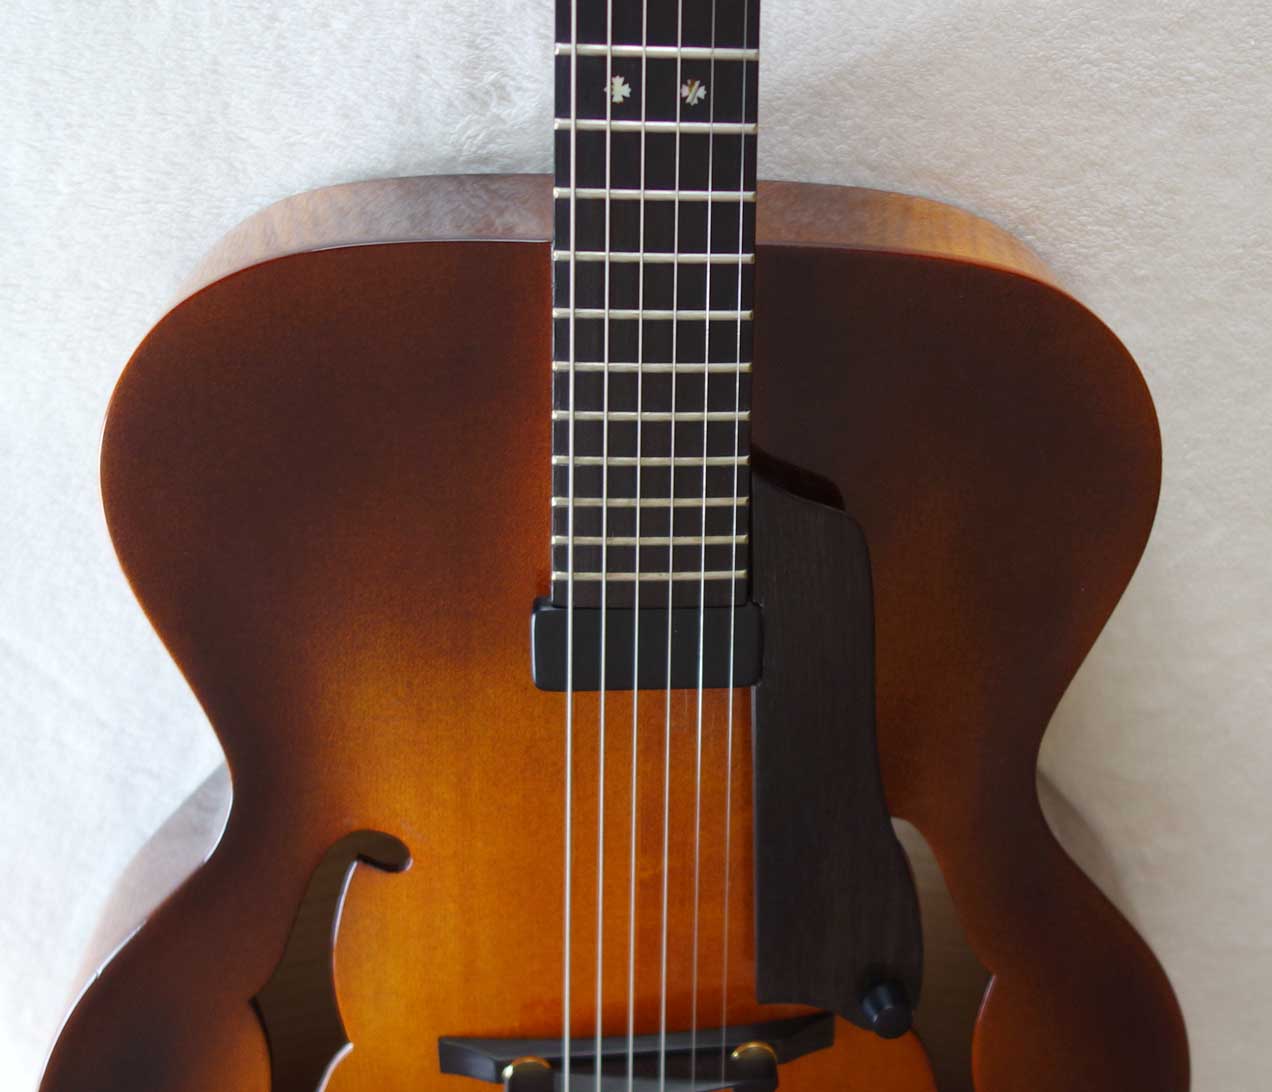 2008 Dale Unger--American Archtop "American Collector" Series, 17" Upgraded Tonewoods, Violin Finish